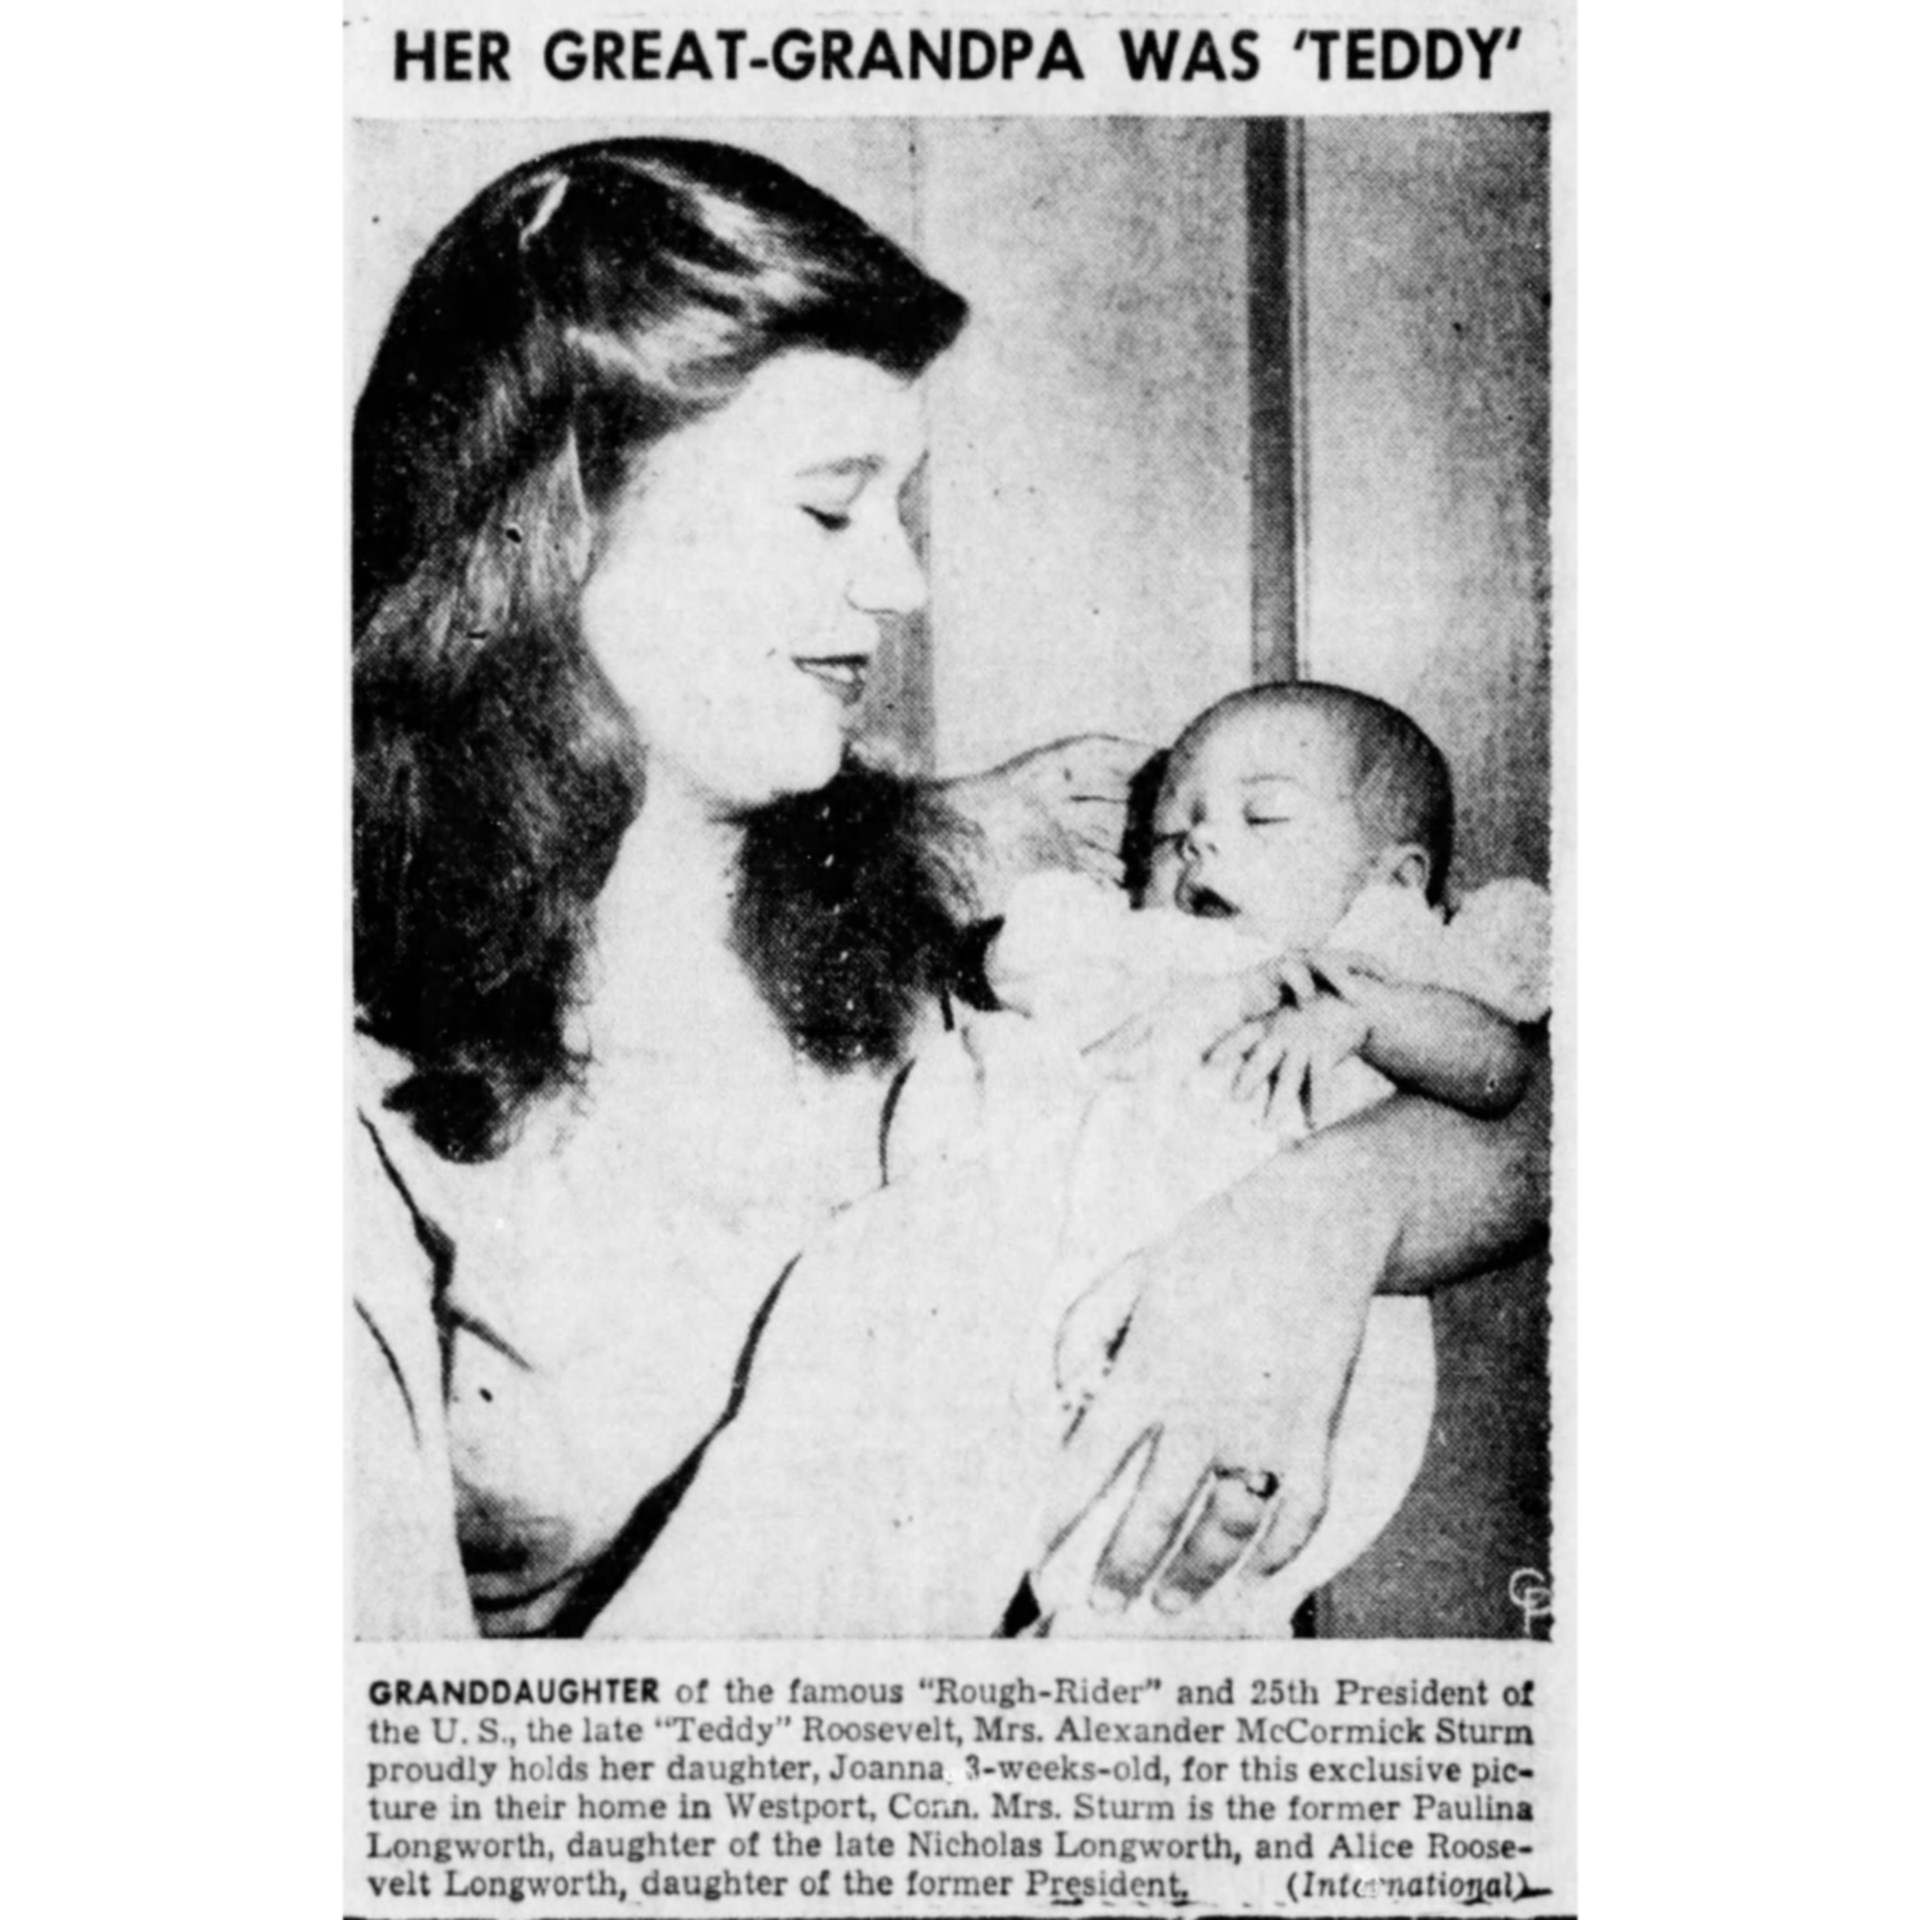 vintage newspaper clipping woman with baby TEXT ON IMAGE NOTING HER GREAT-GRANDPA WAS 'TEDDY'